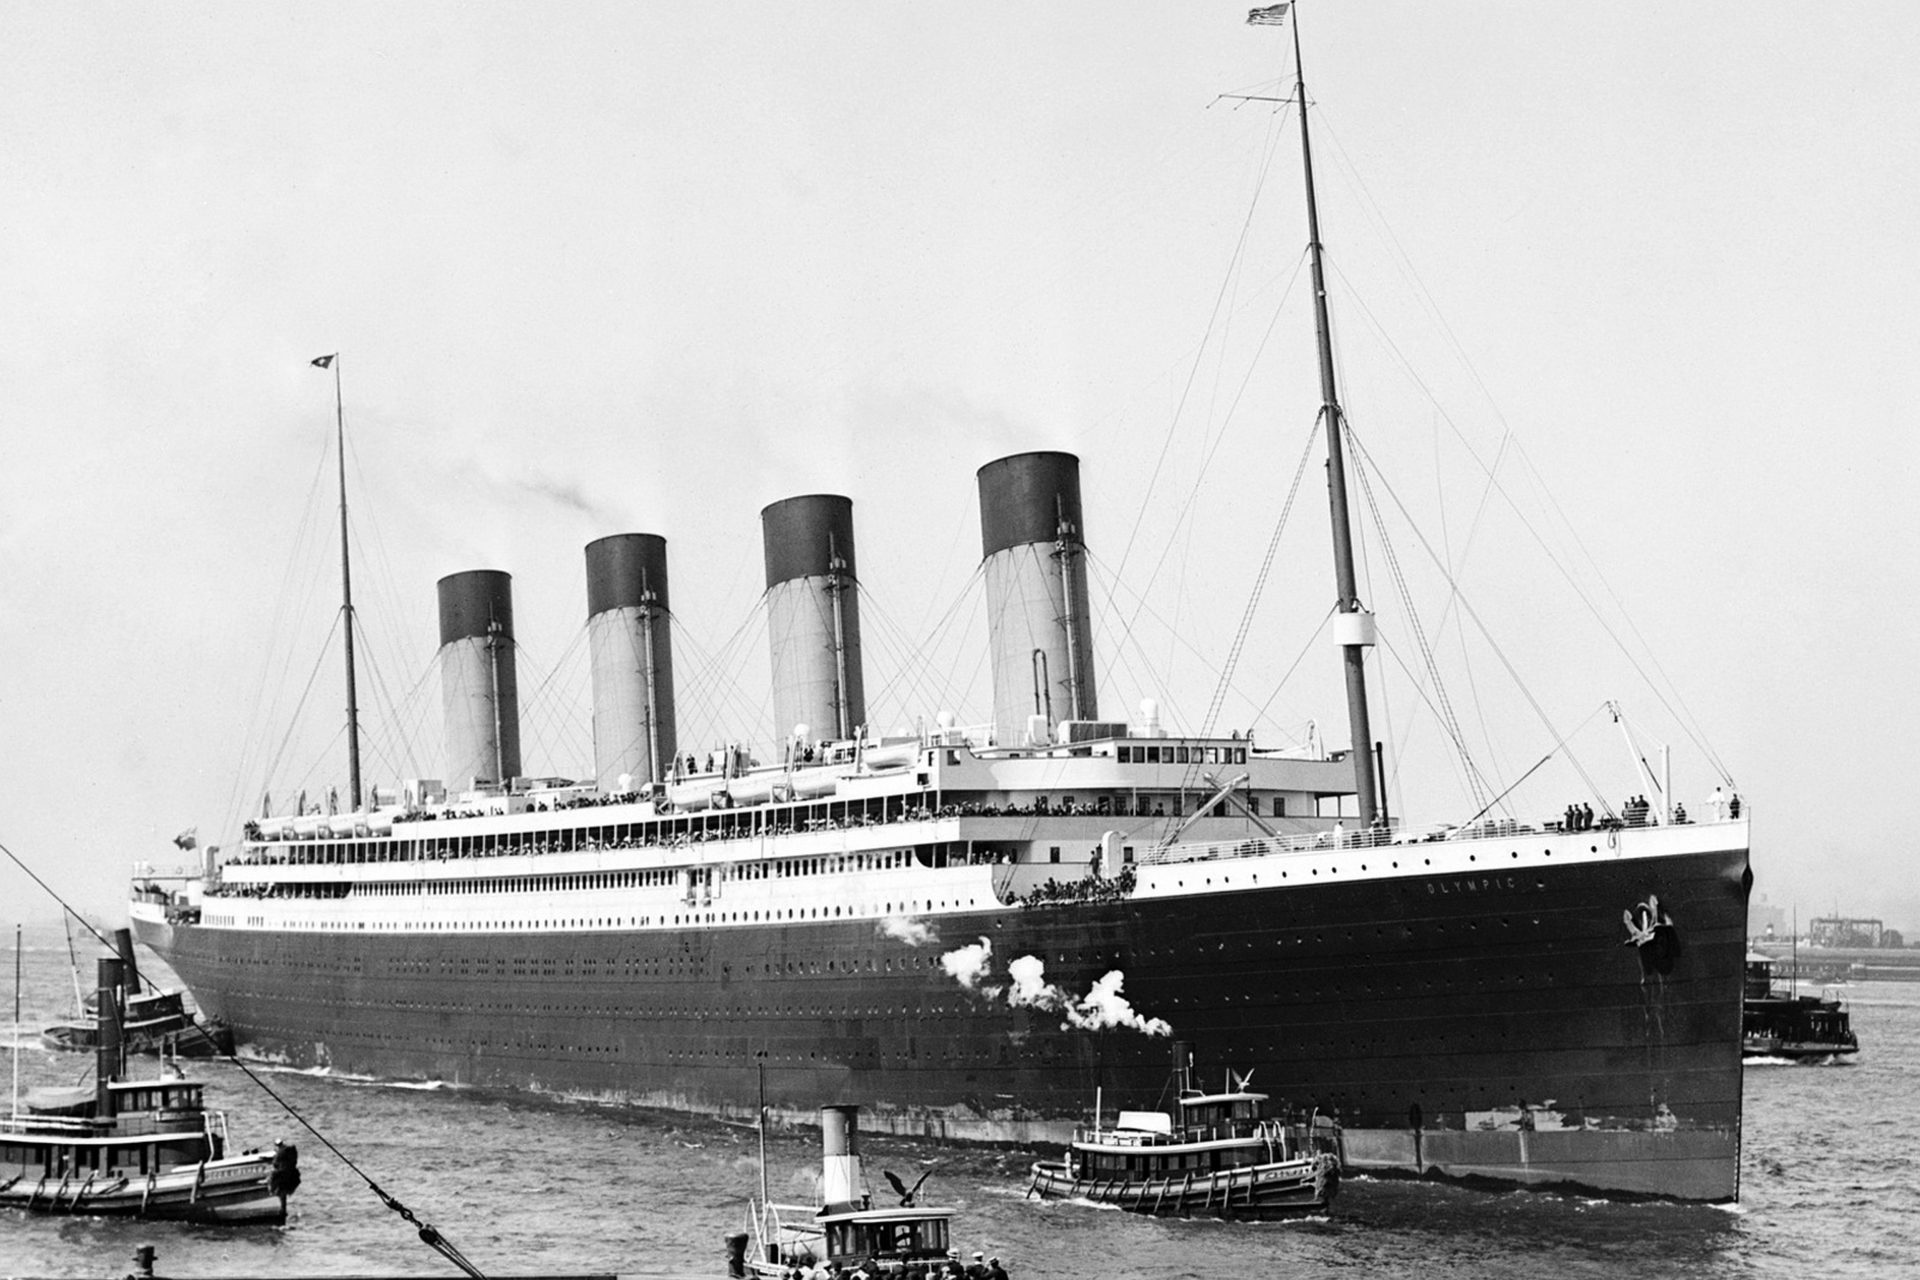 'Titanic or Olympic: Which Ship Sank?'